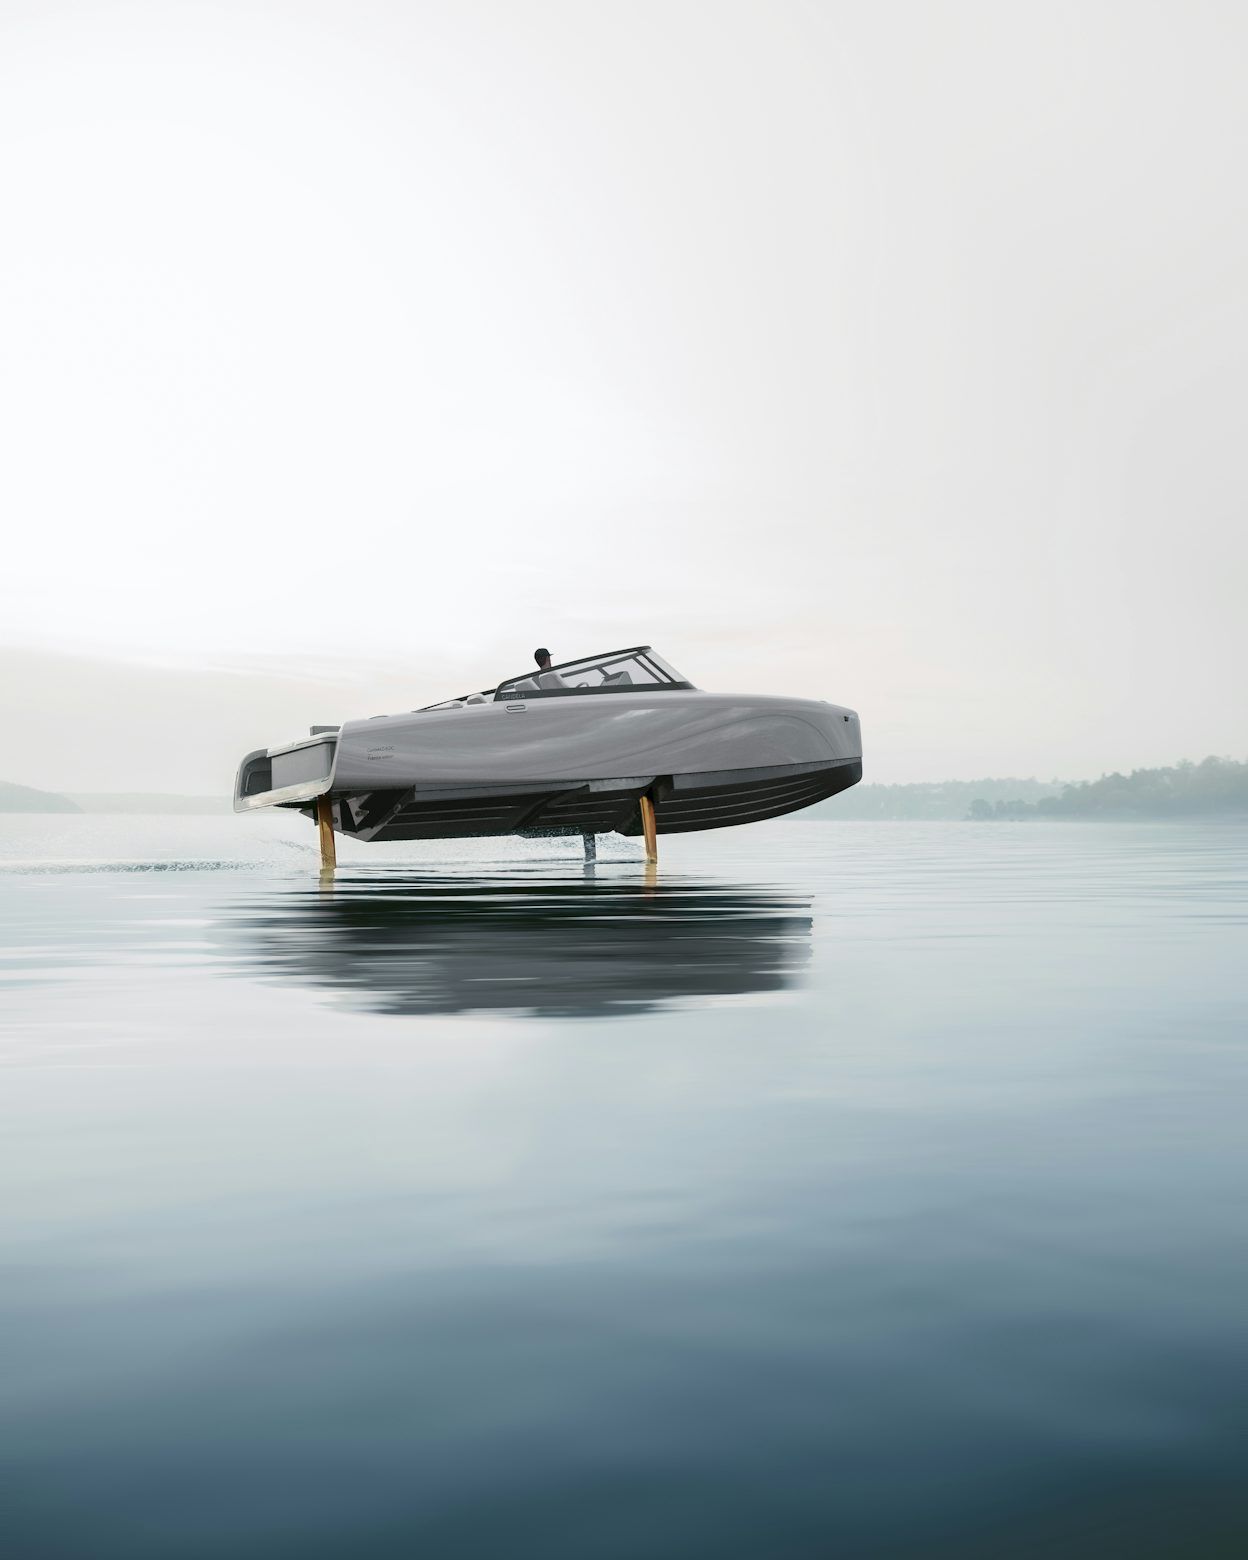 Candela boat driving in a calm foggy environment. Shown from the side.